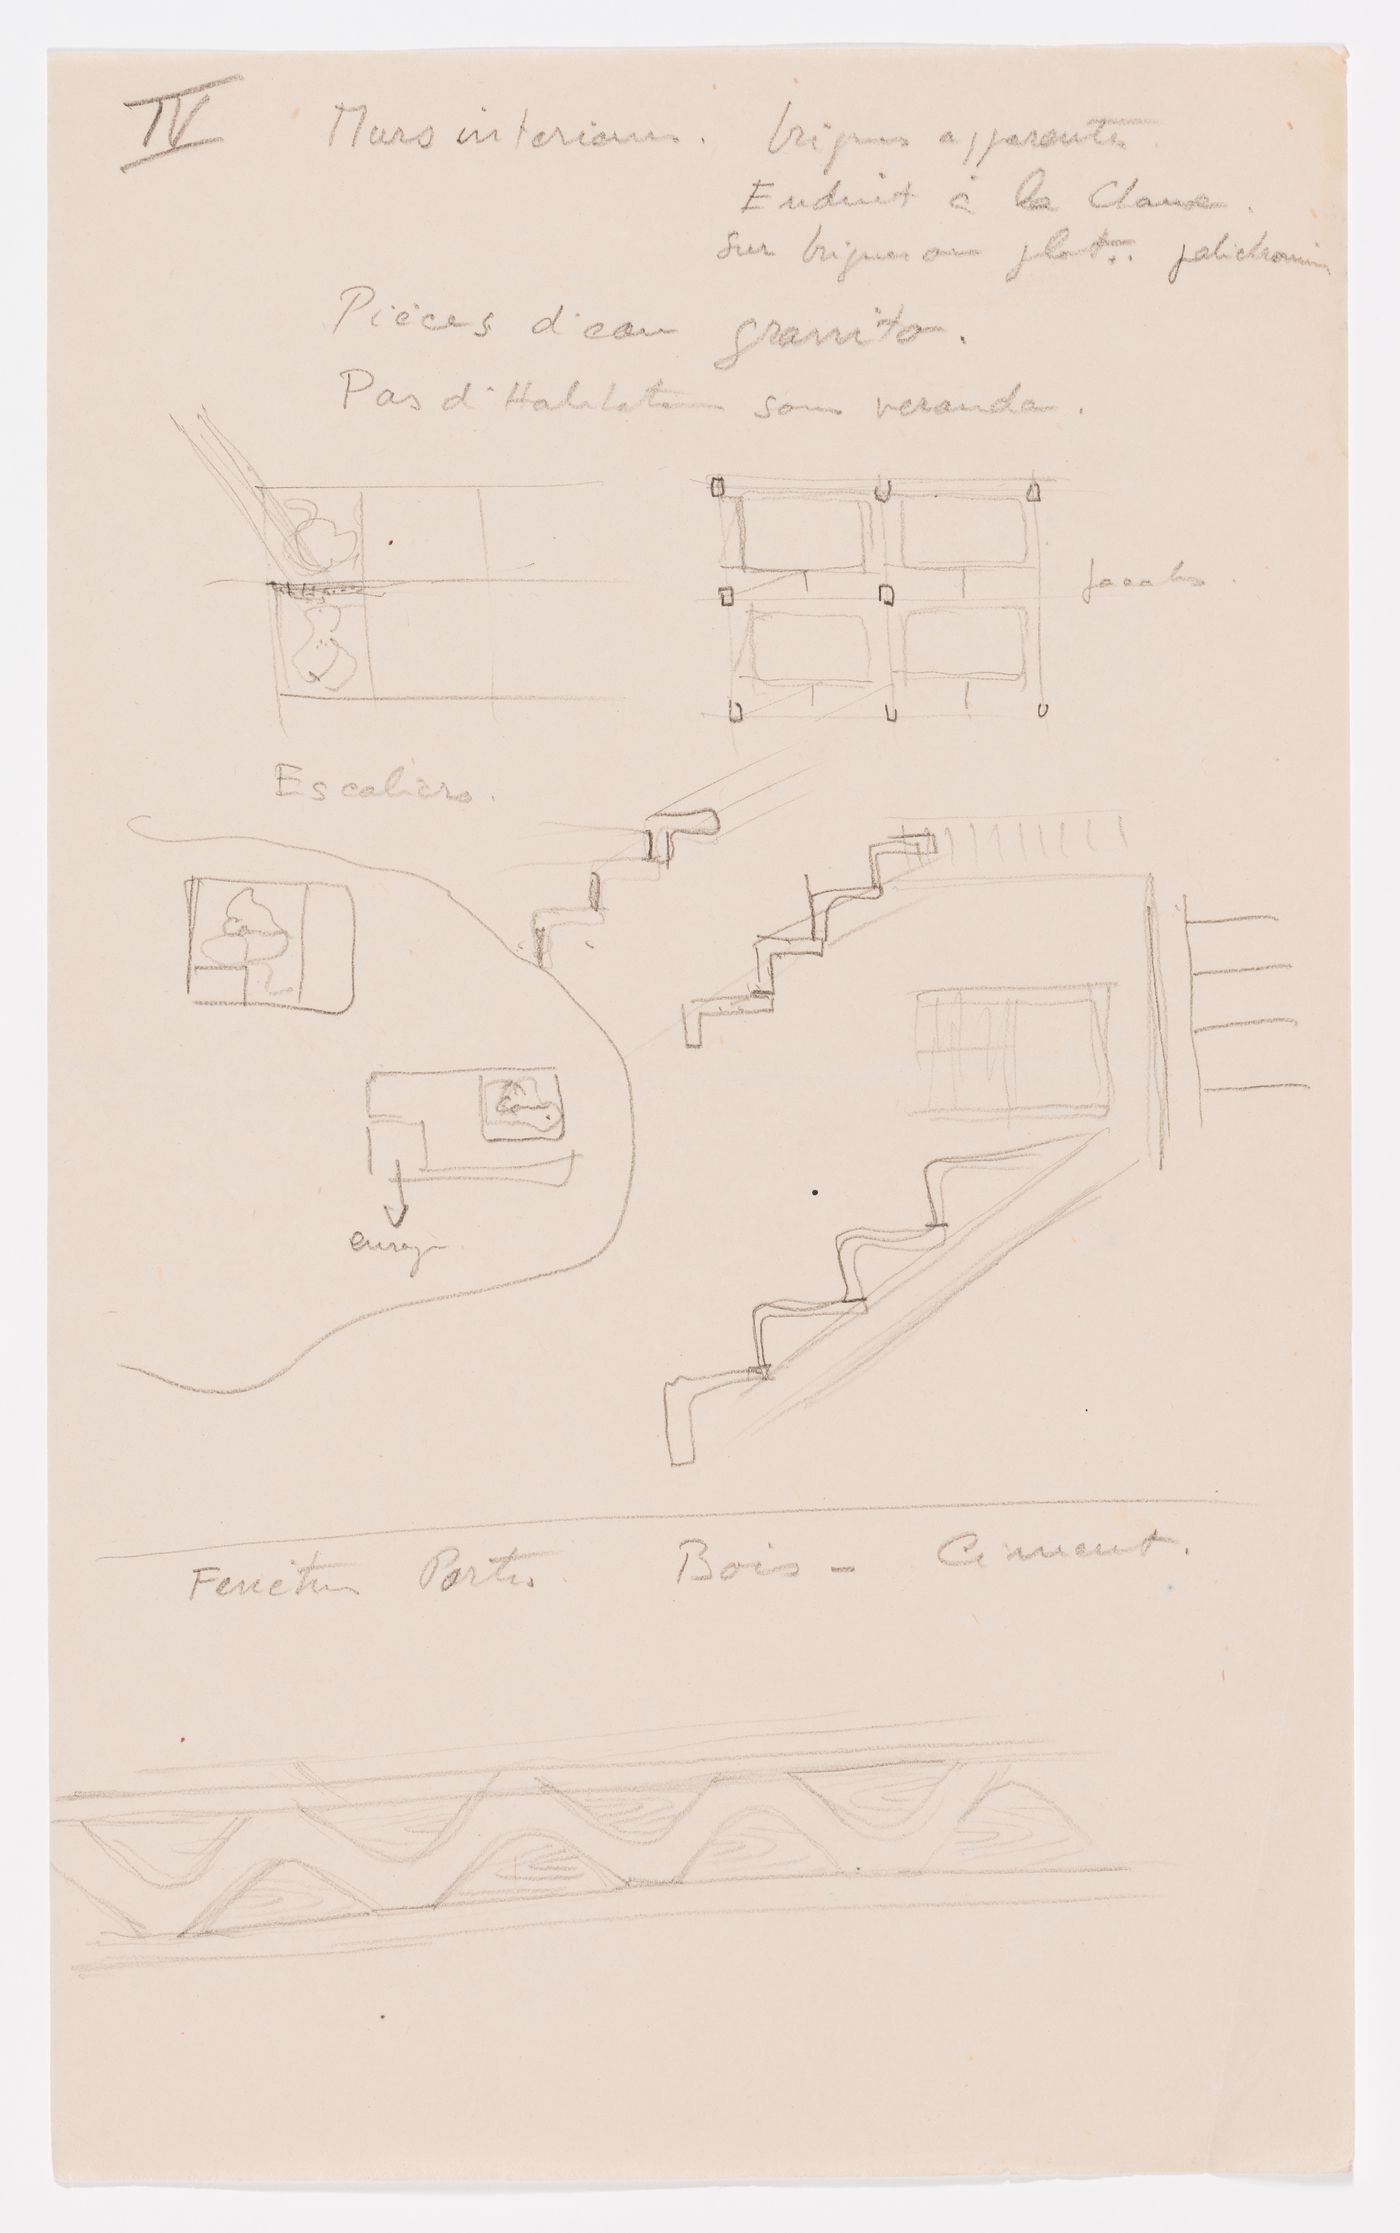 Sketches and notes for dwellings and building possibly in Chandigarh, India